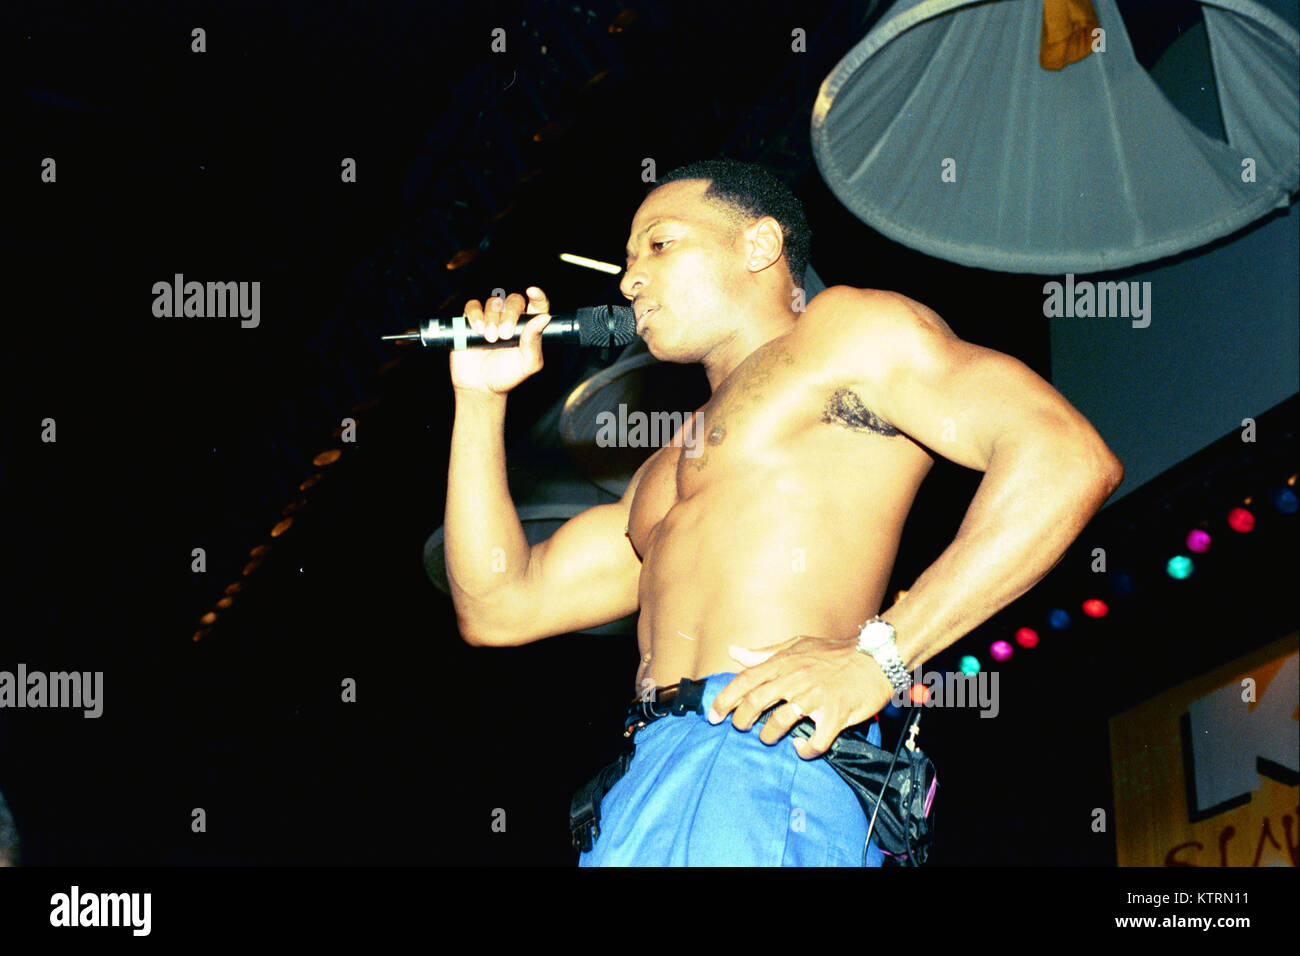 CONCORD, CA - 1997: Blackstreet performs at KMEL Summer Jam 1997 at the Concord Pavilion in Concord, California on August 9, 1997. Credit: Pat Johnson/MediaPunch Stock Photo